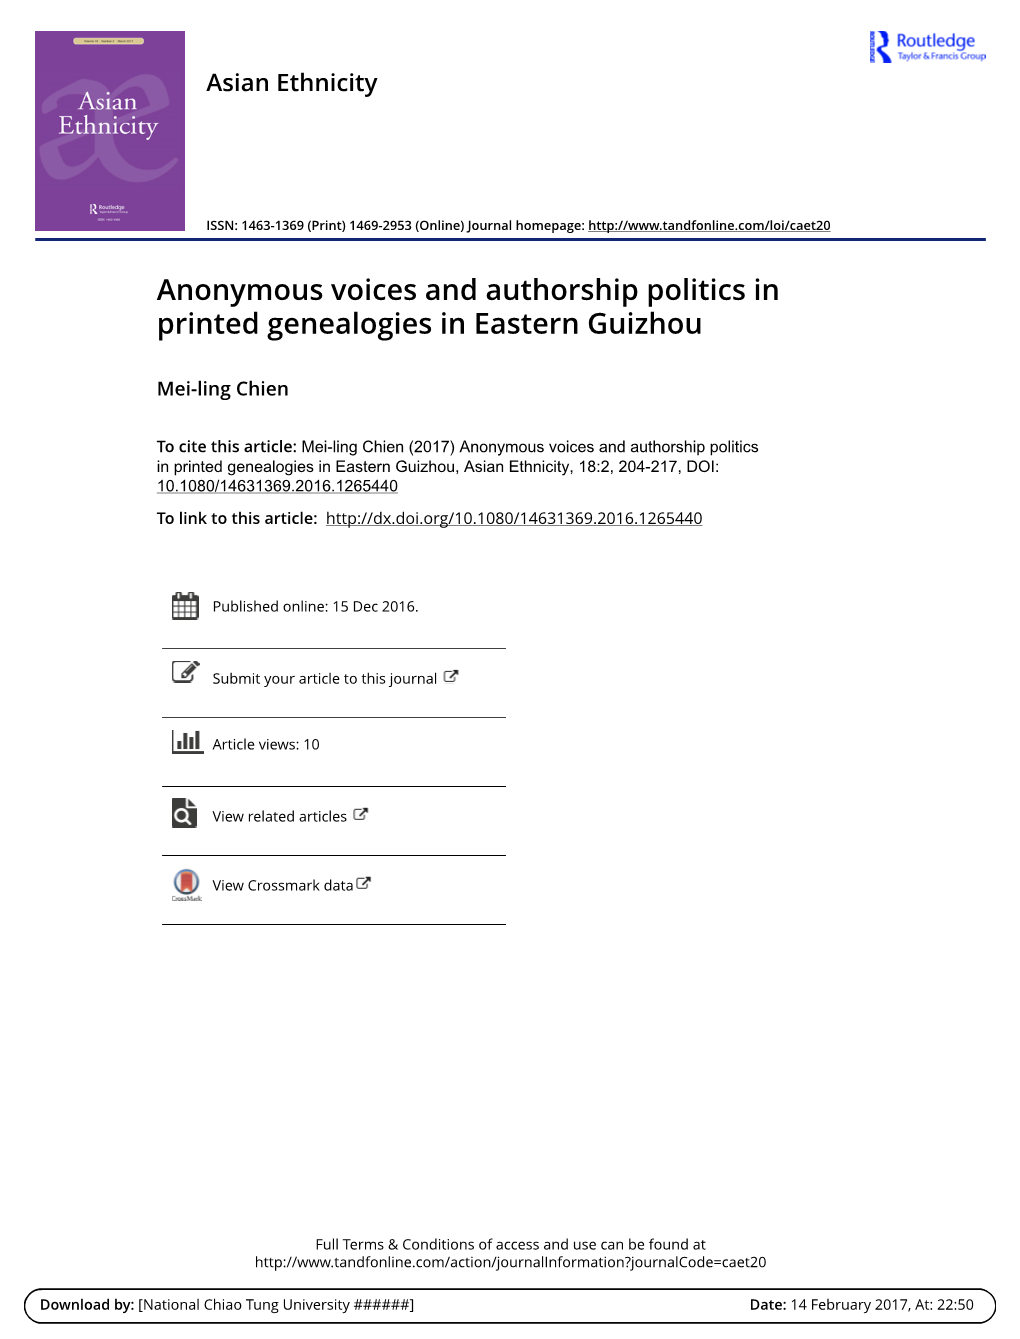 Anonymous Voices and Authorship Politics in Printed Genealogies in Eastern Guizhou